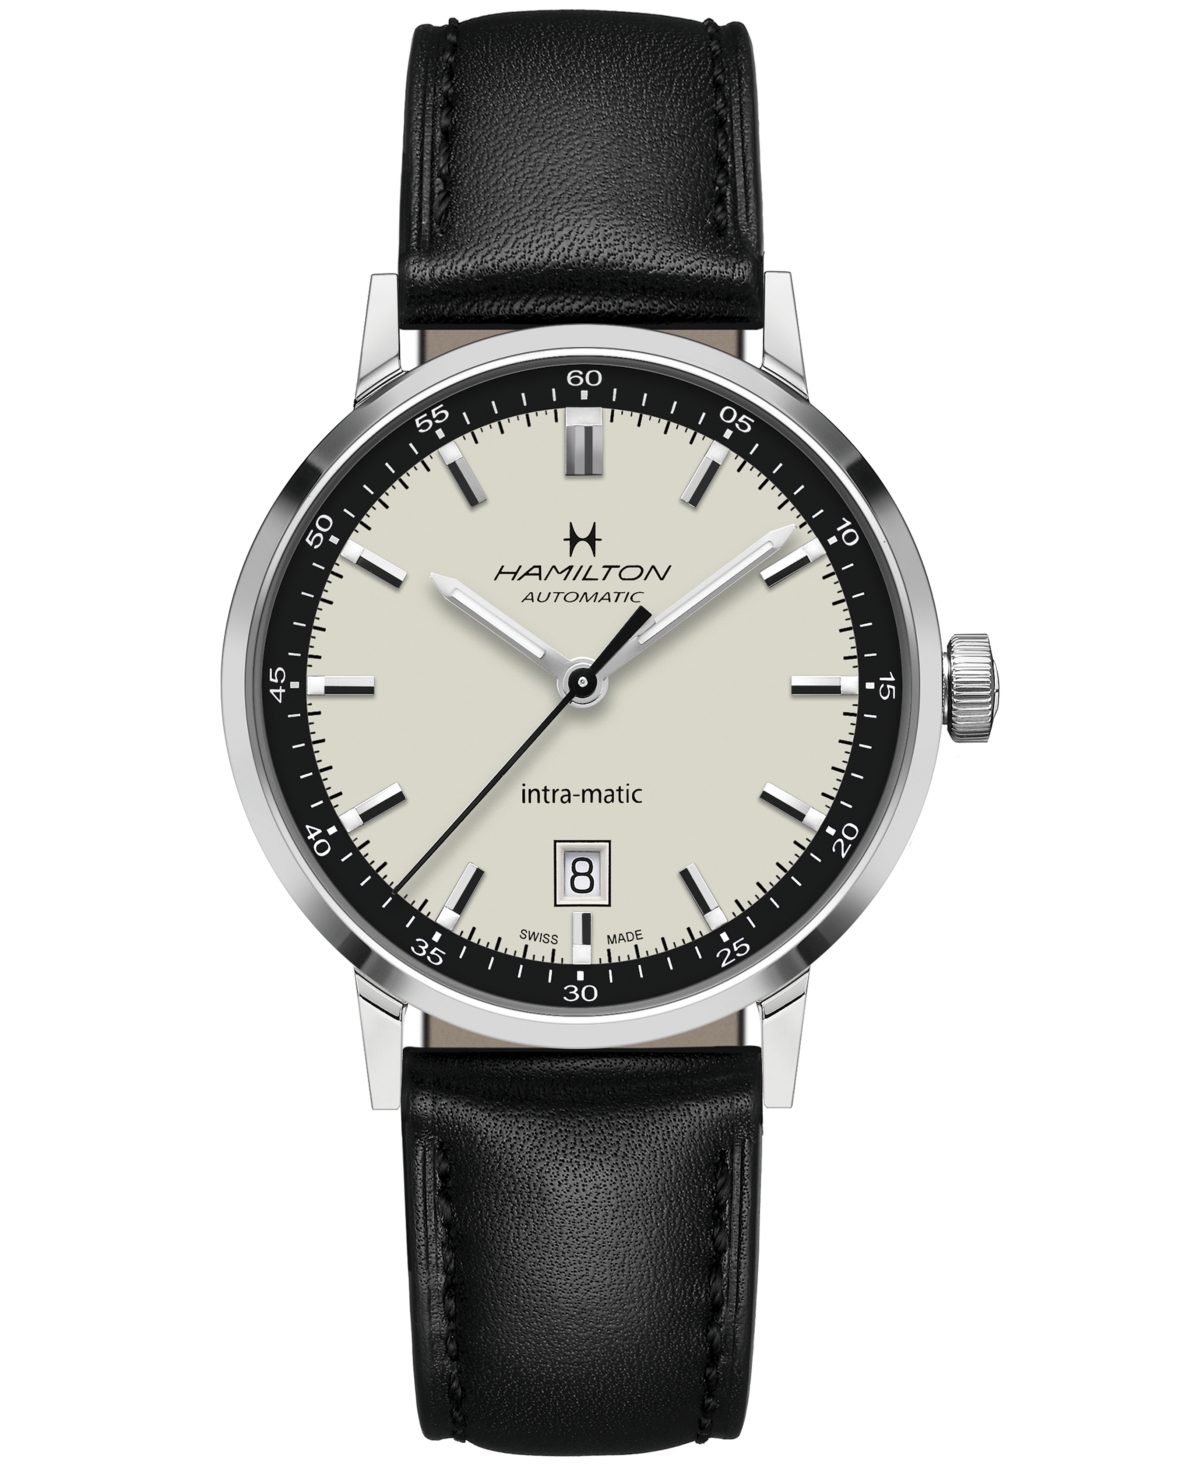 HAMILTON MEN'S SWISS AUTOMATIC INTRA-MATIC BLACK LEATHER STRAP WATCH 40MM